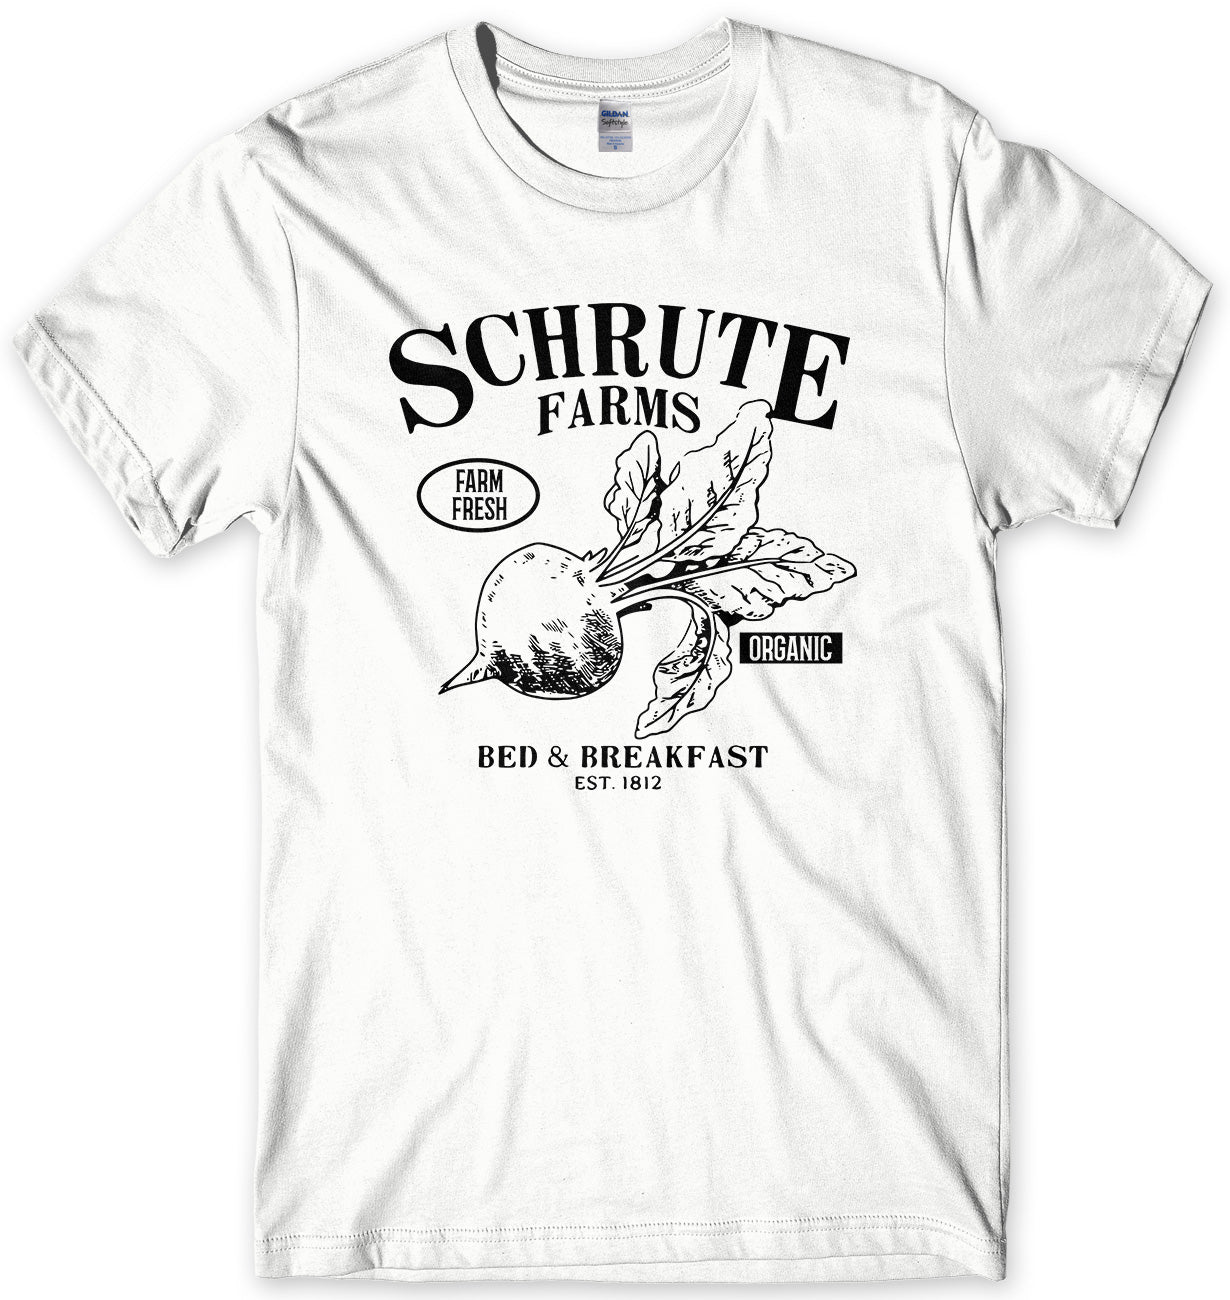 SCHRUTE FARMS B&B - INSPIRED BY THE OFFICE US MENS UNISEX T-SHIRT